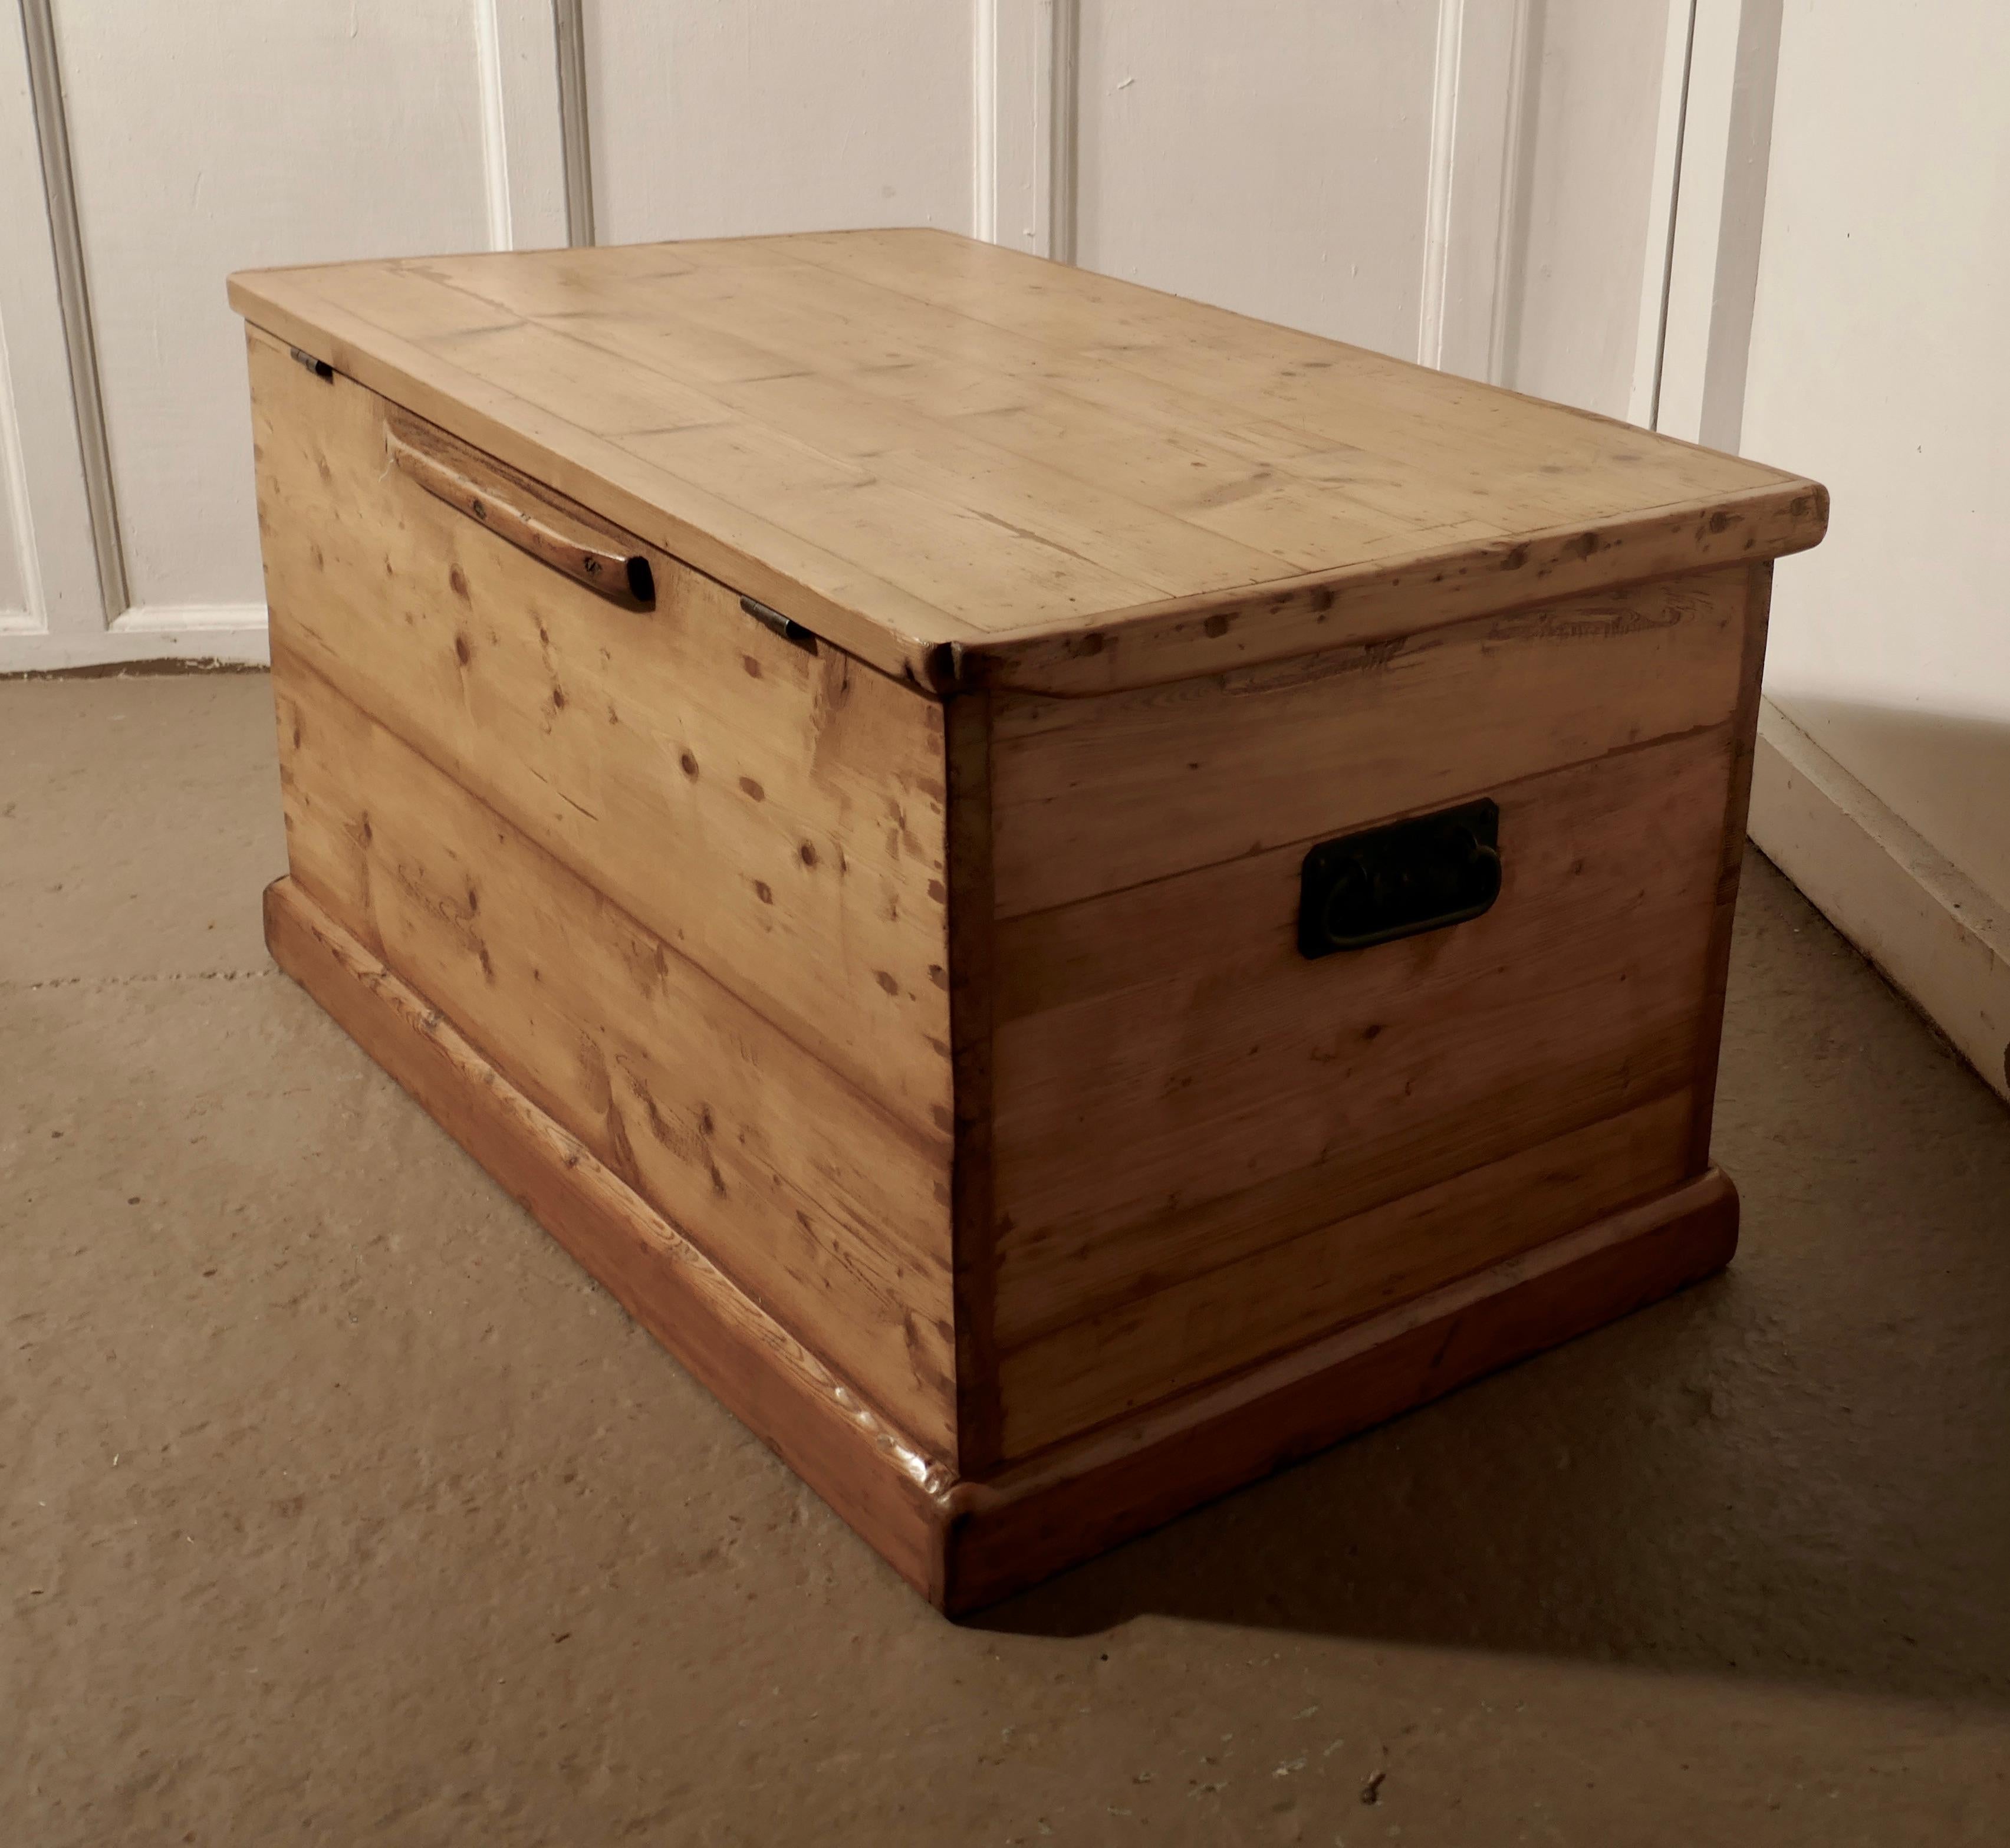 Large Victorian pine blanket box, coffee table or shoe tidy
 
A roomy Victorian pine blanket box or coffee table
This is a good quality pine box it has been fully restored, it has iron carrying handles and it stands on an all round plinth so it